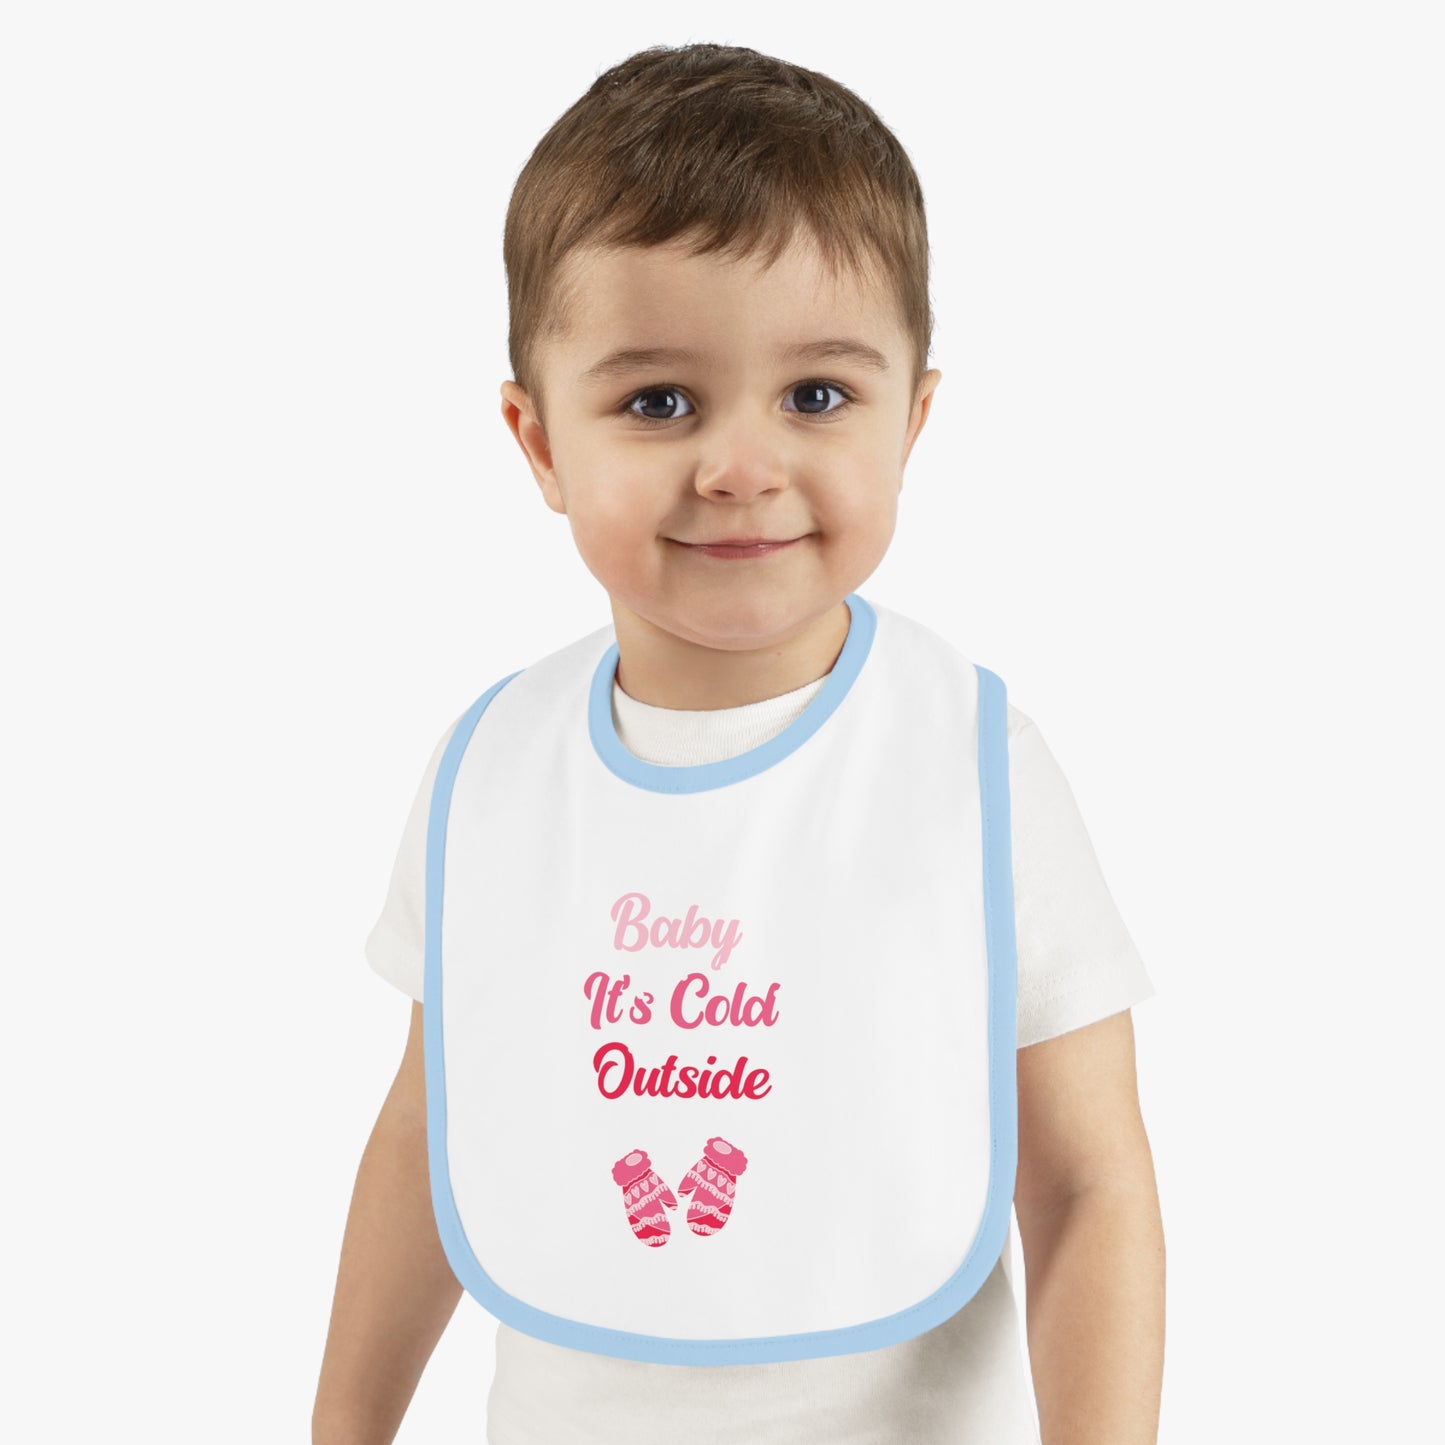 Baby Bib - "Baby It's Cold Outside" Baby Contrast Trim Jersey Bib, Comes in 3 Different Colors